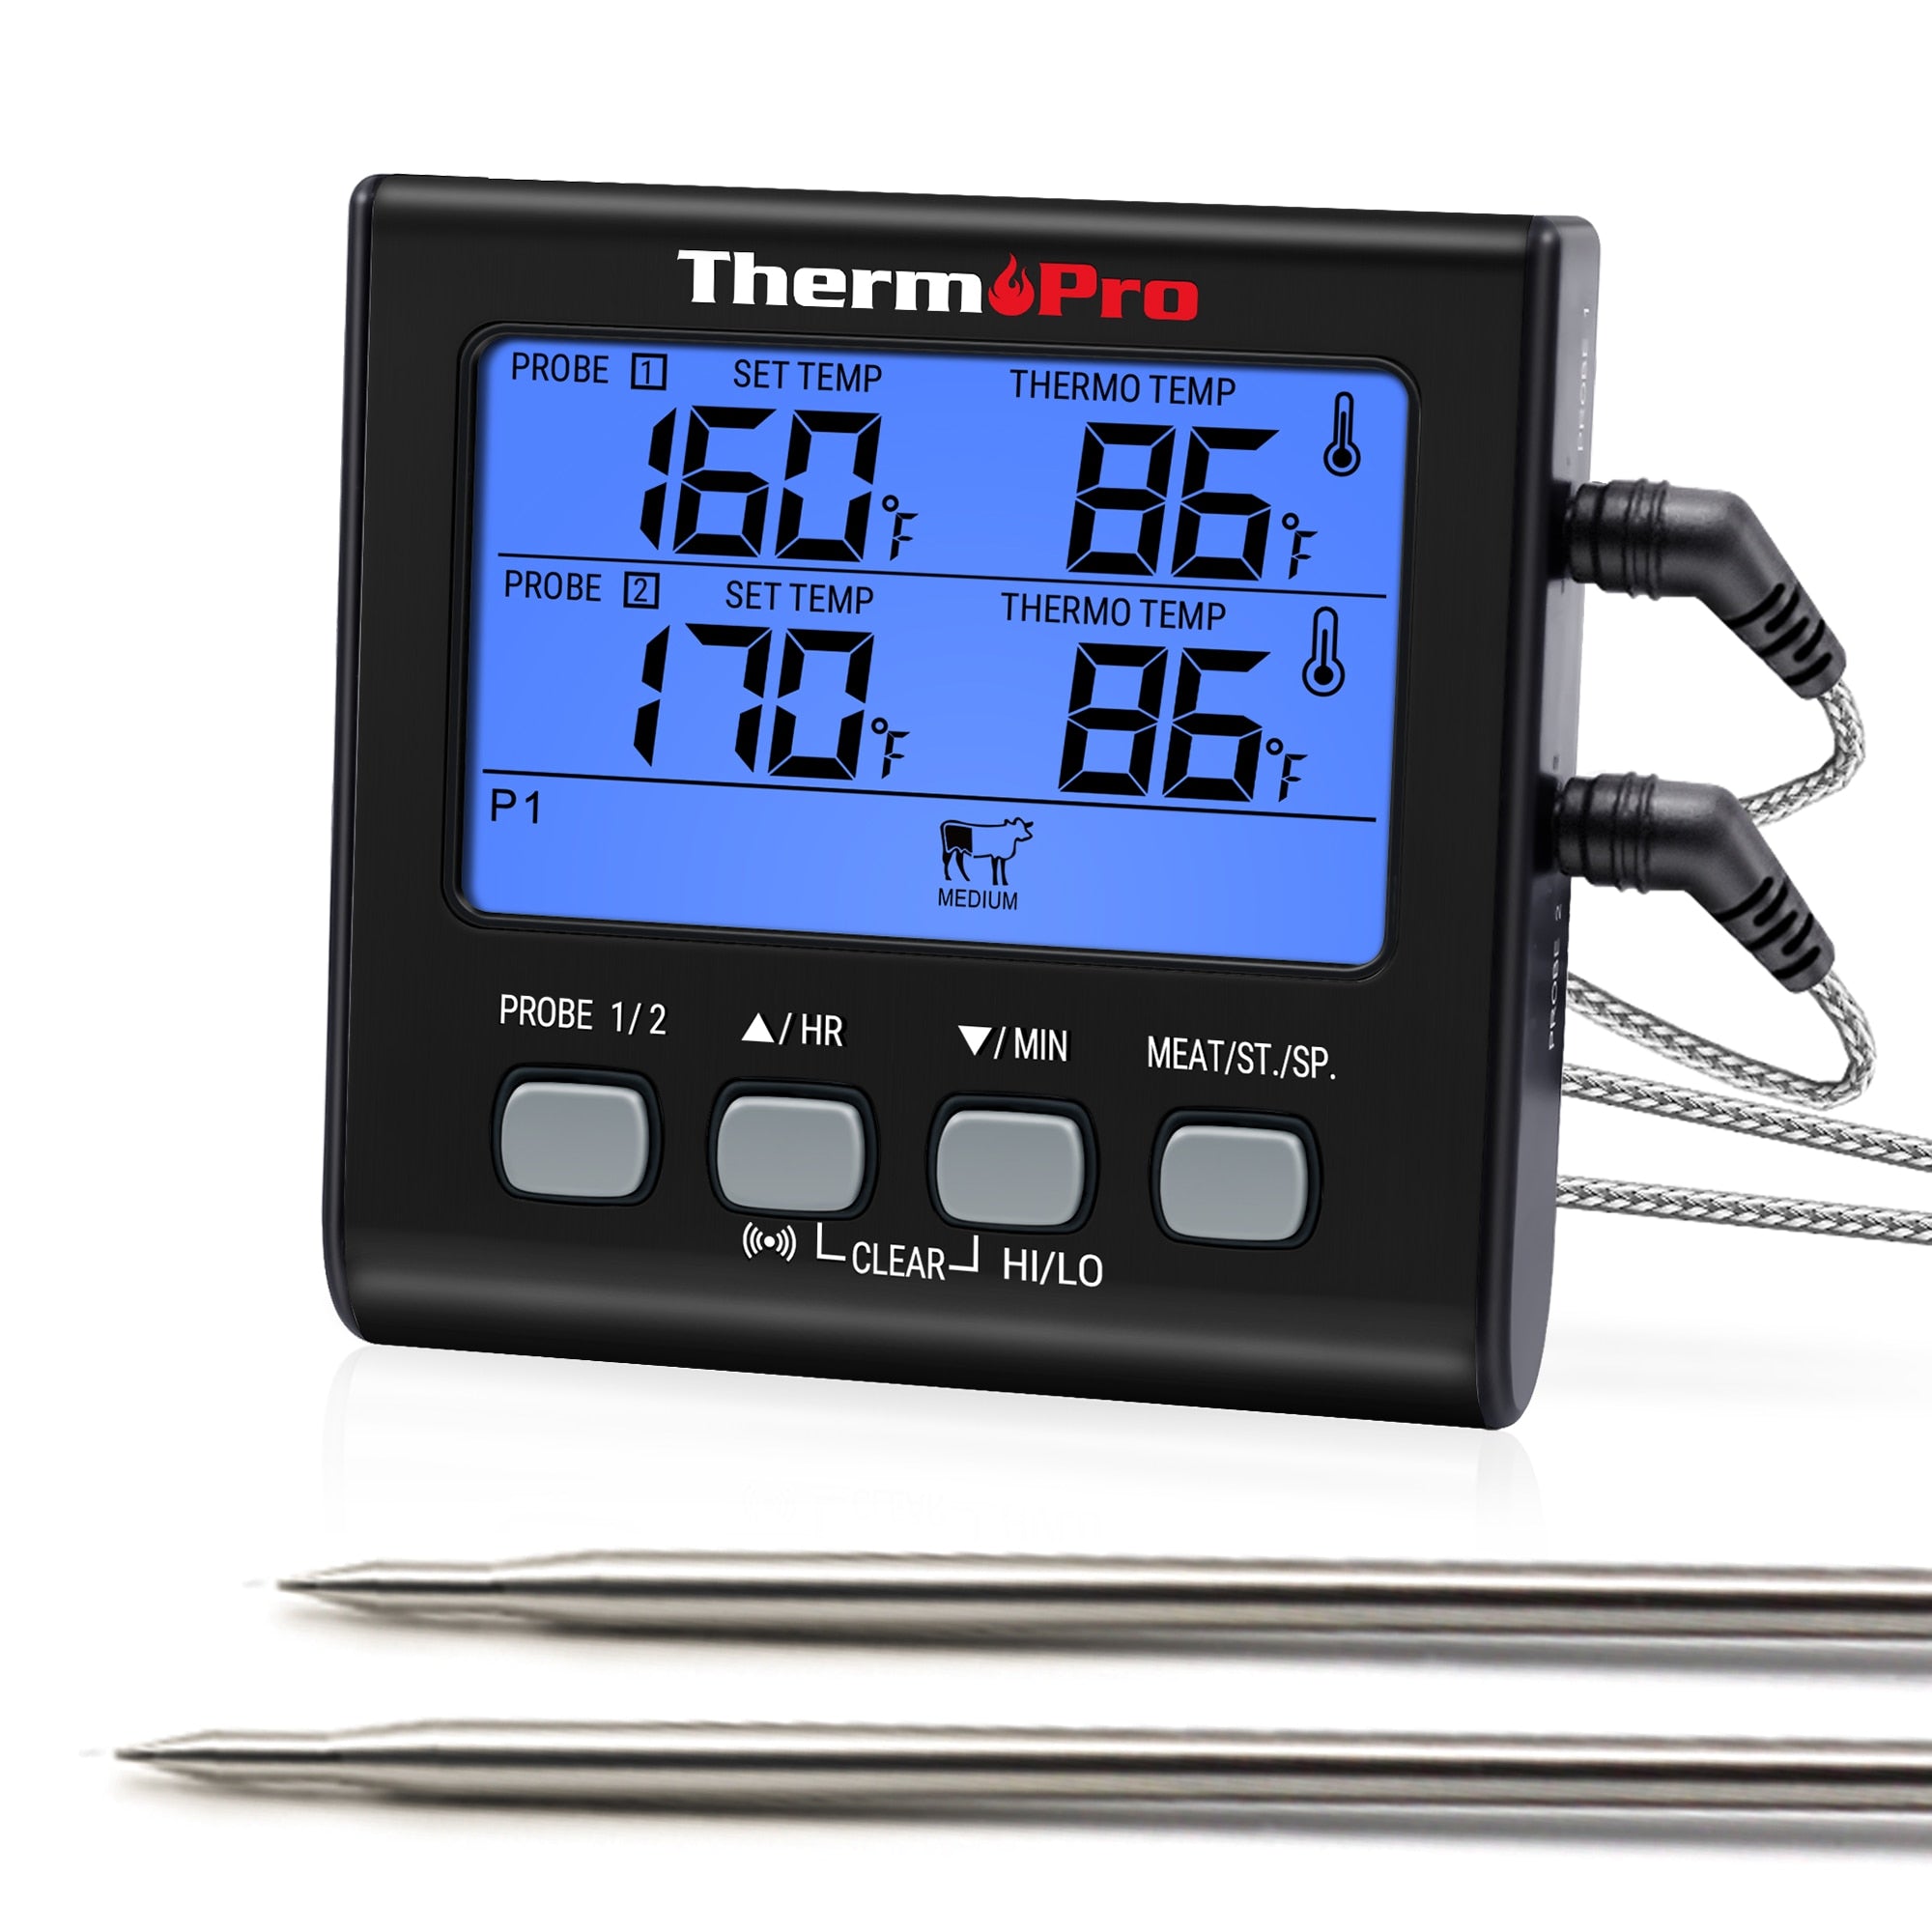 ThermoPro TP829 300M Wireless Digital Kitchen Thermometer 4 Meat Probes  Cooking Oven Meat Thermometer With Timer Backlit